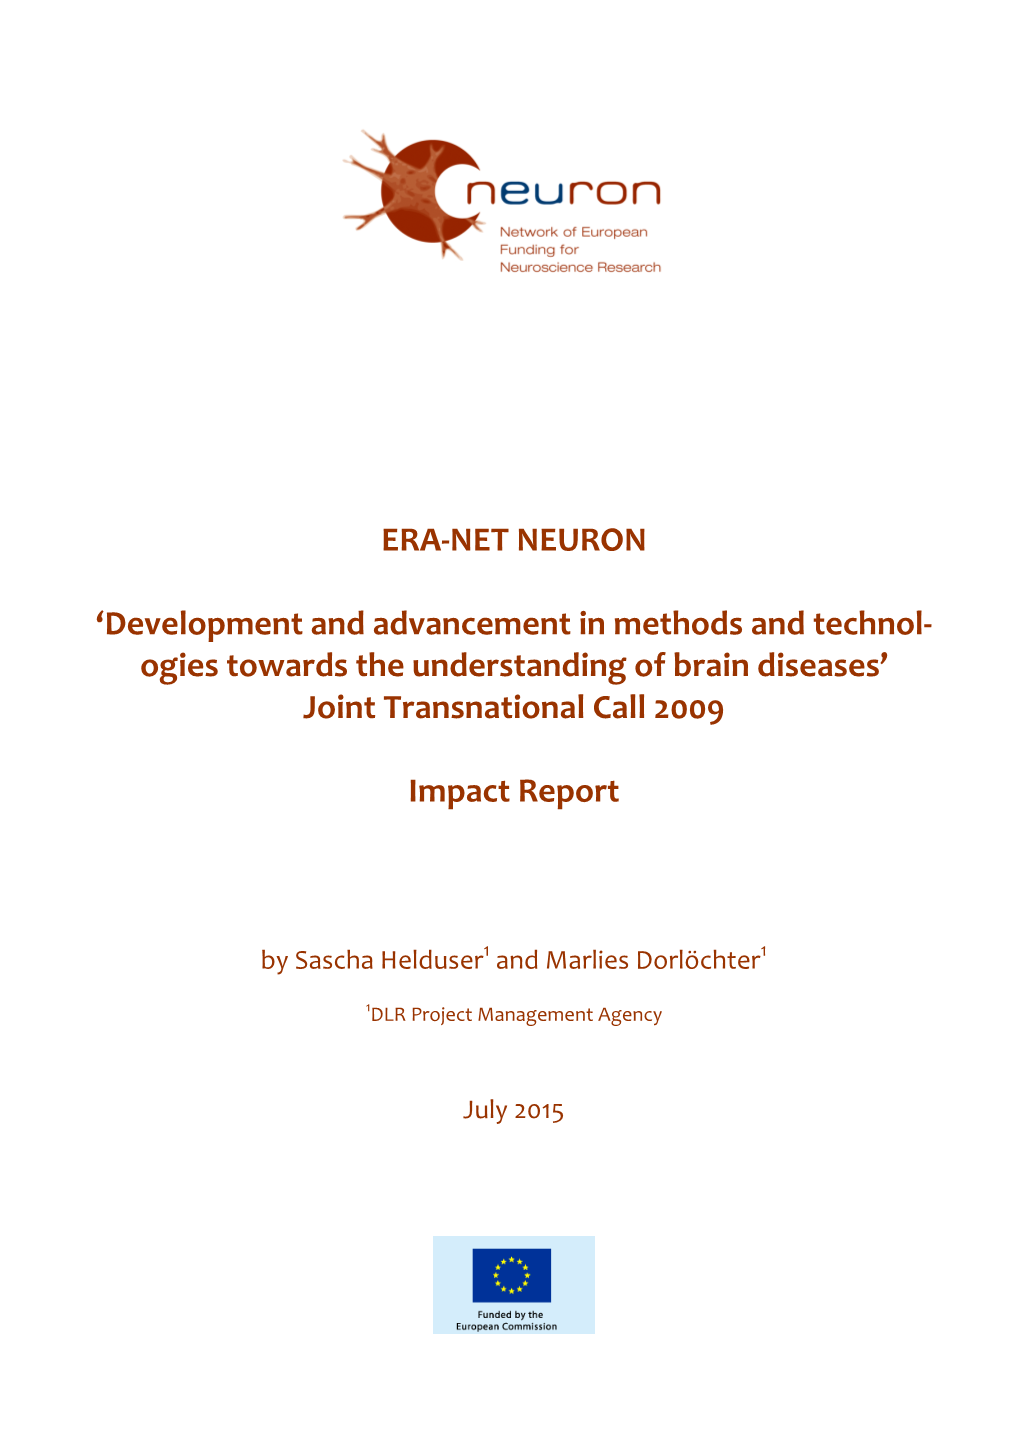 Joint Transnational Call 2009 Impact Report